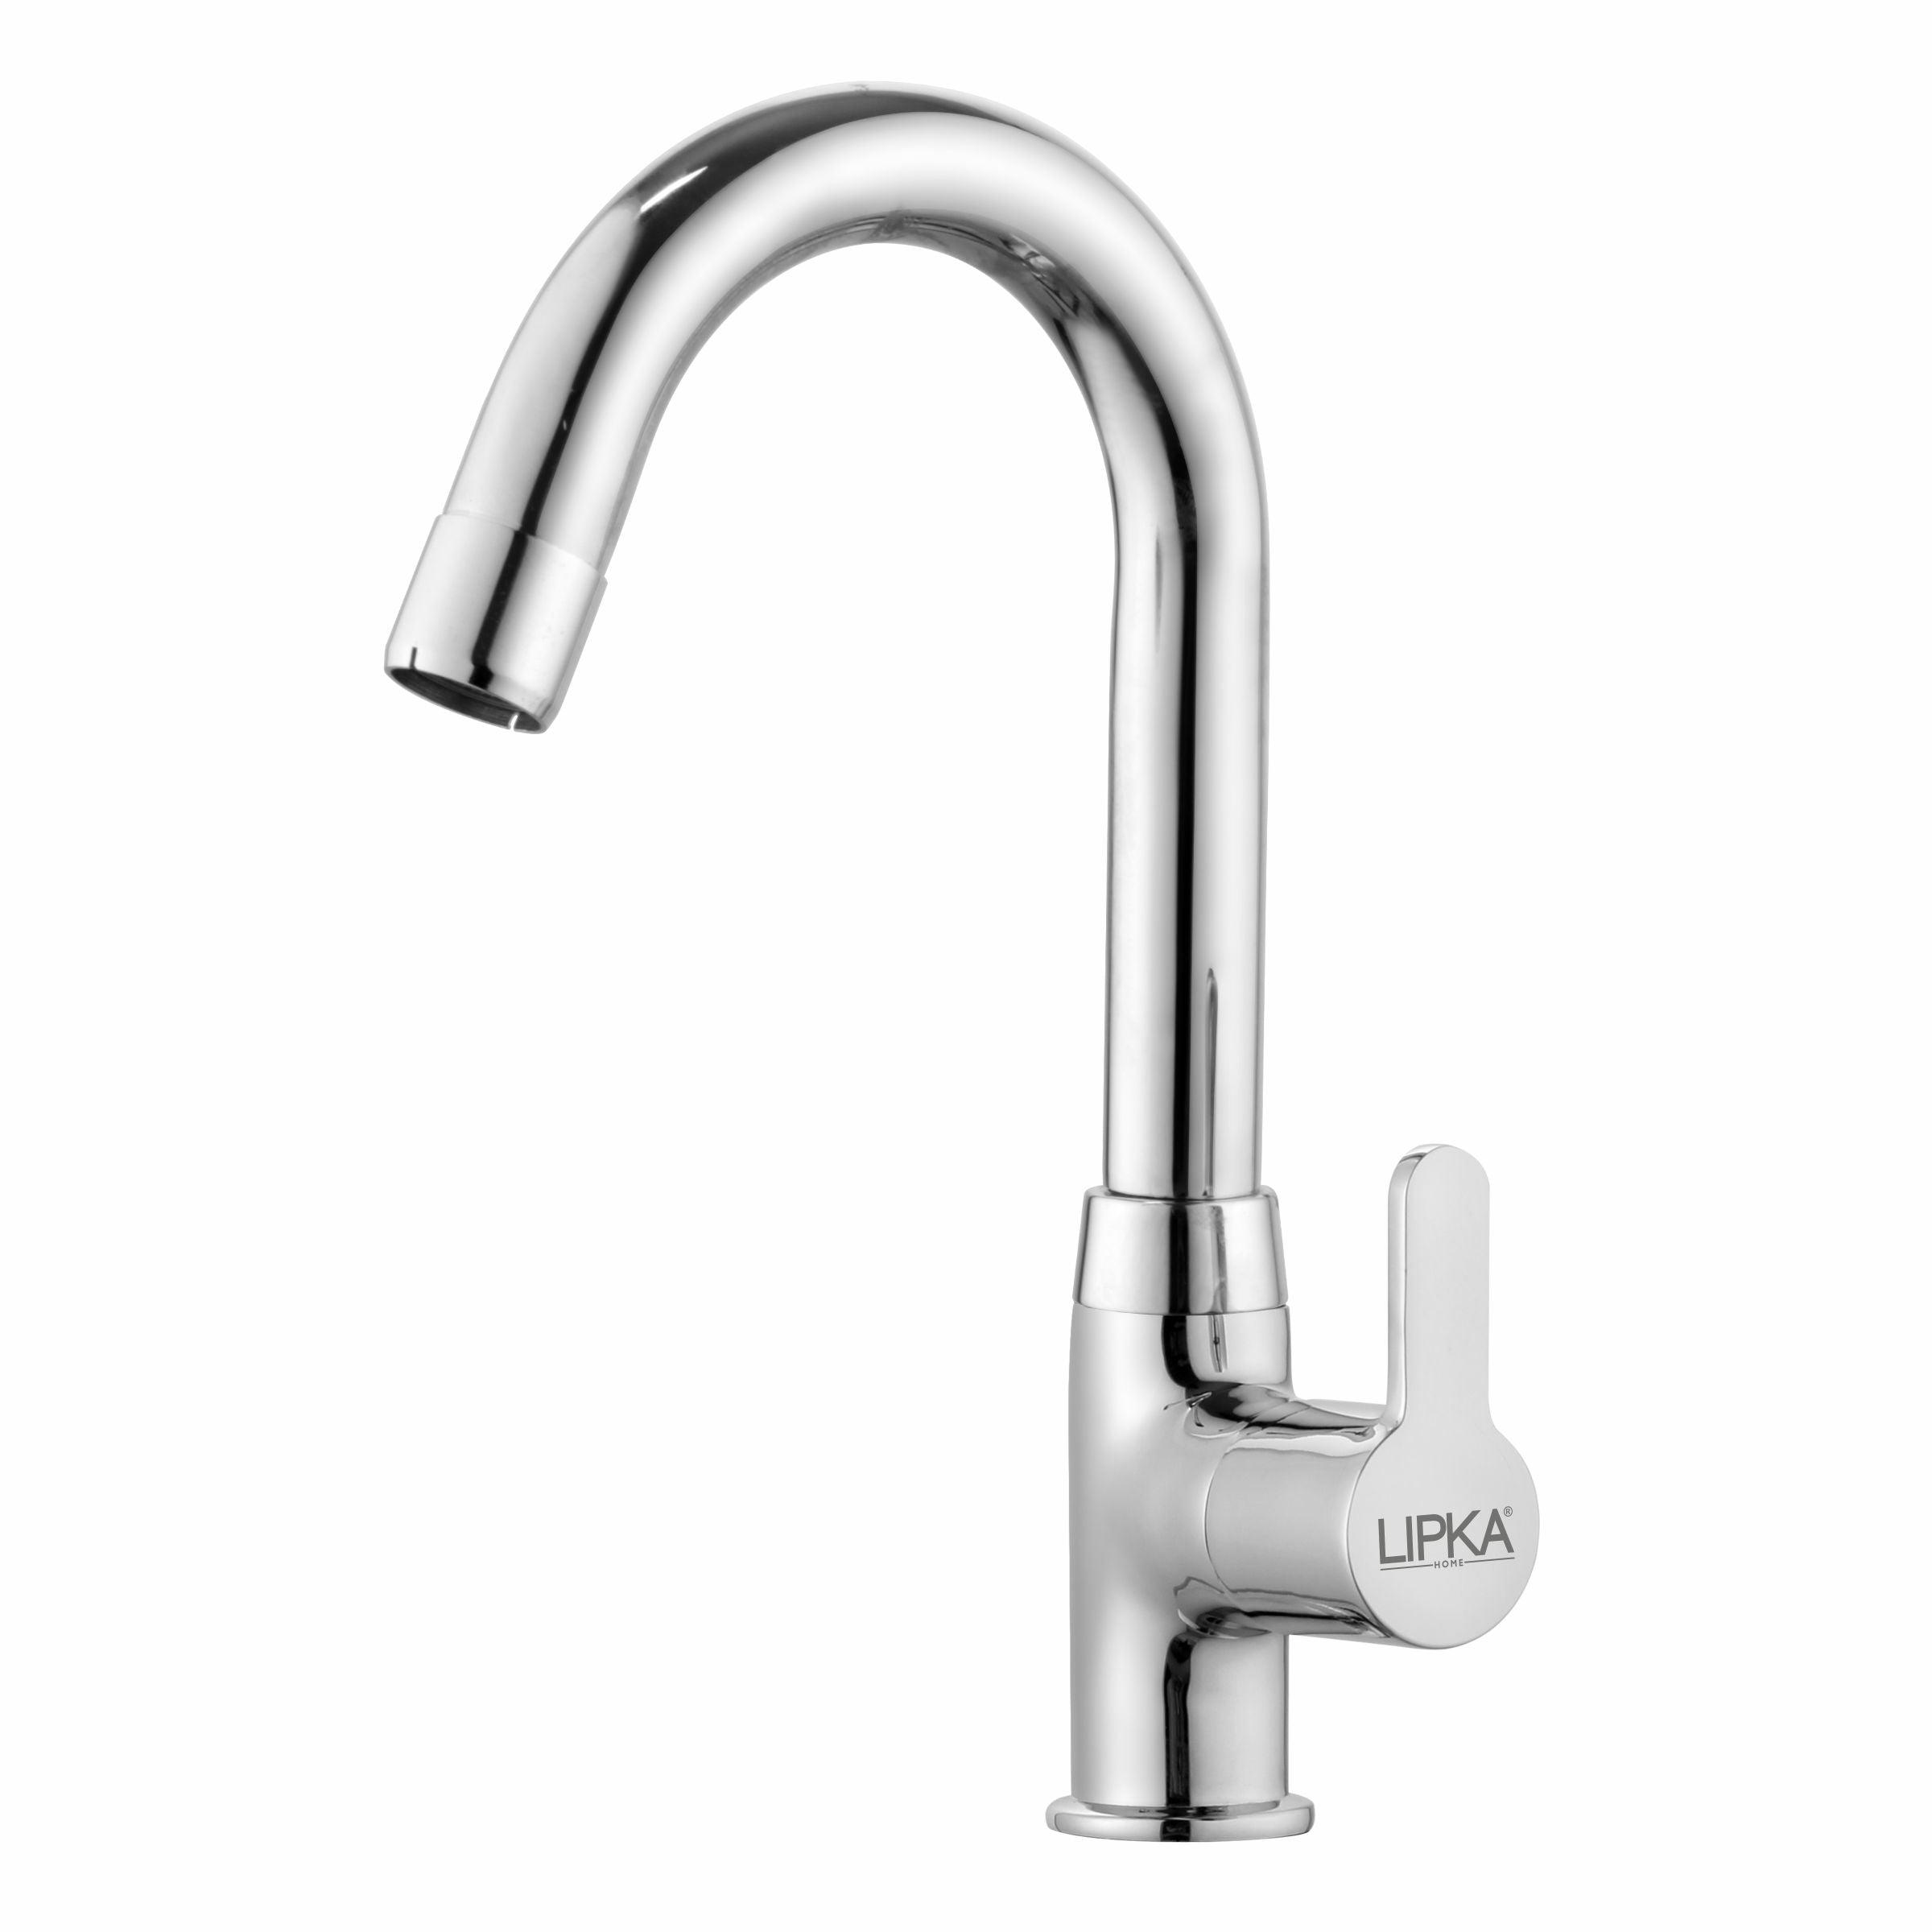 Fusion Swan Neck Brass Faucet with Round Swivel Spout (12 Inches) - LIPKA - Lipka Home